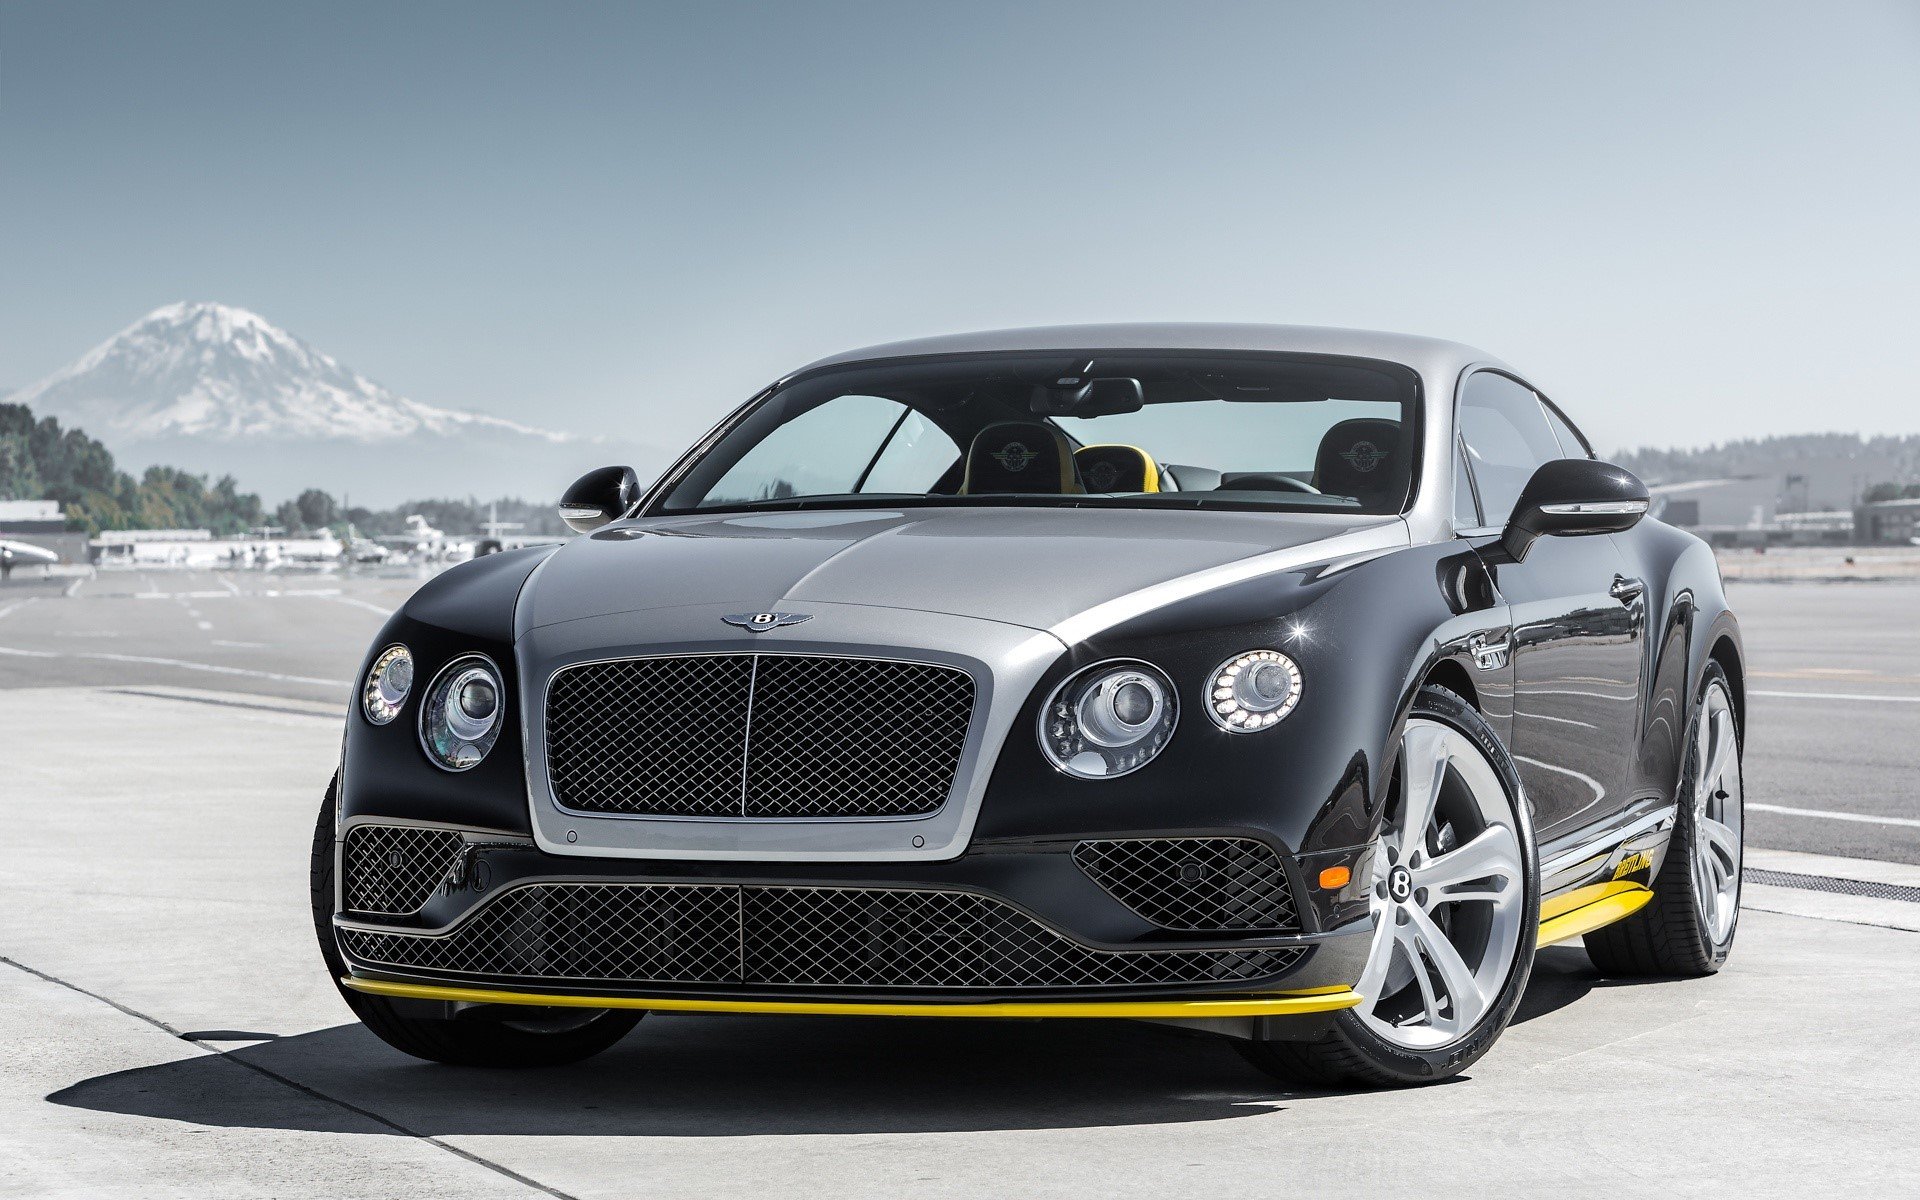 Bentley Continental Gt Number 9 Edition Wallpapers